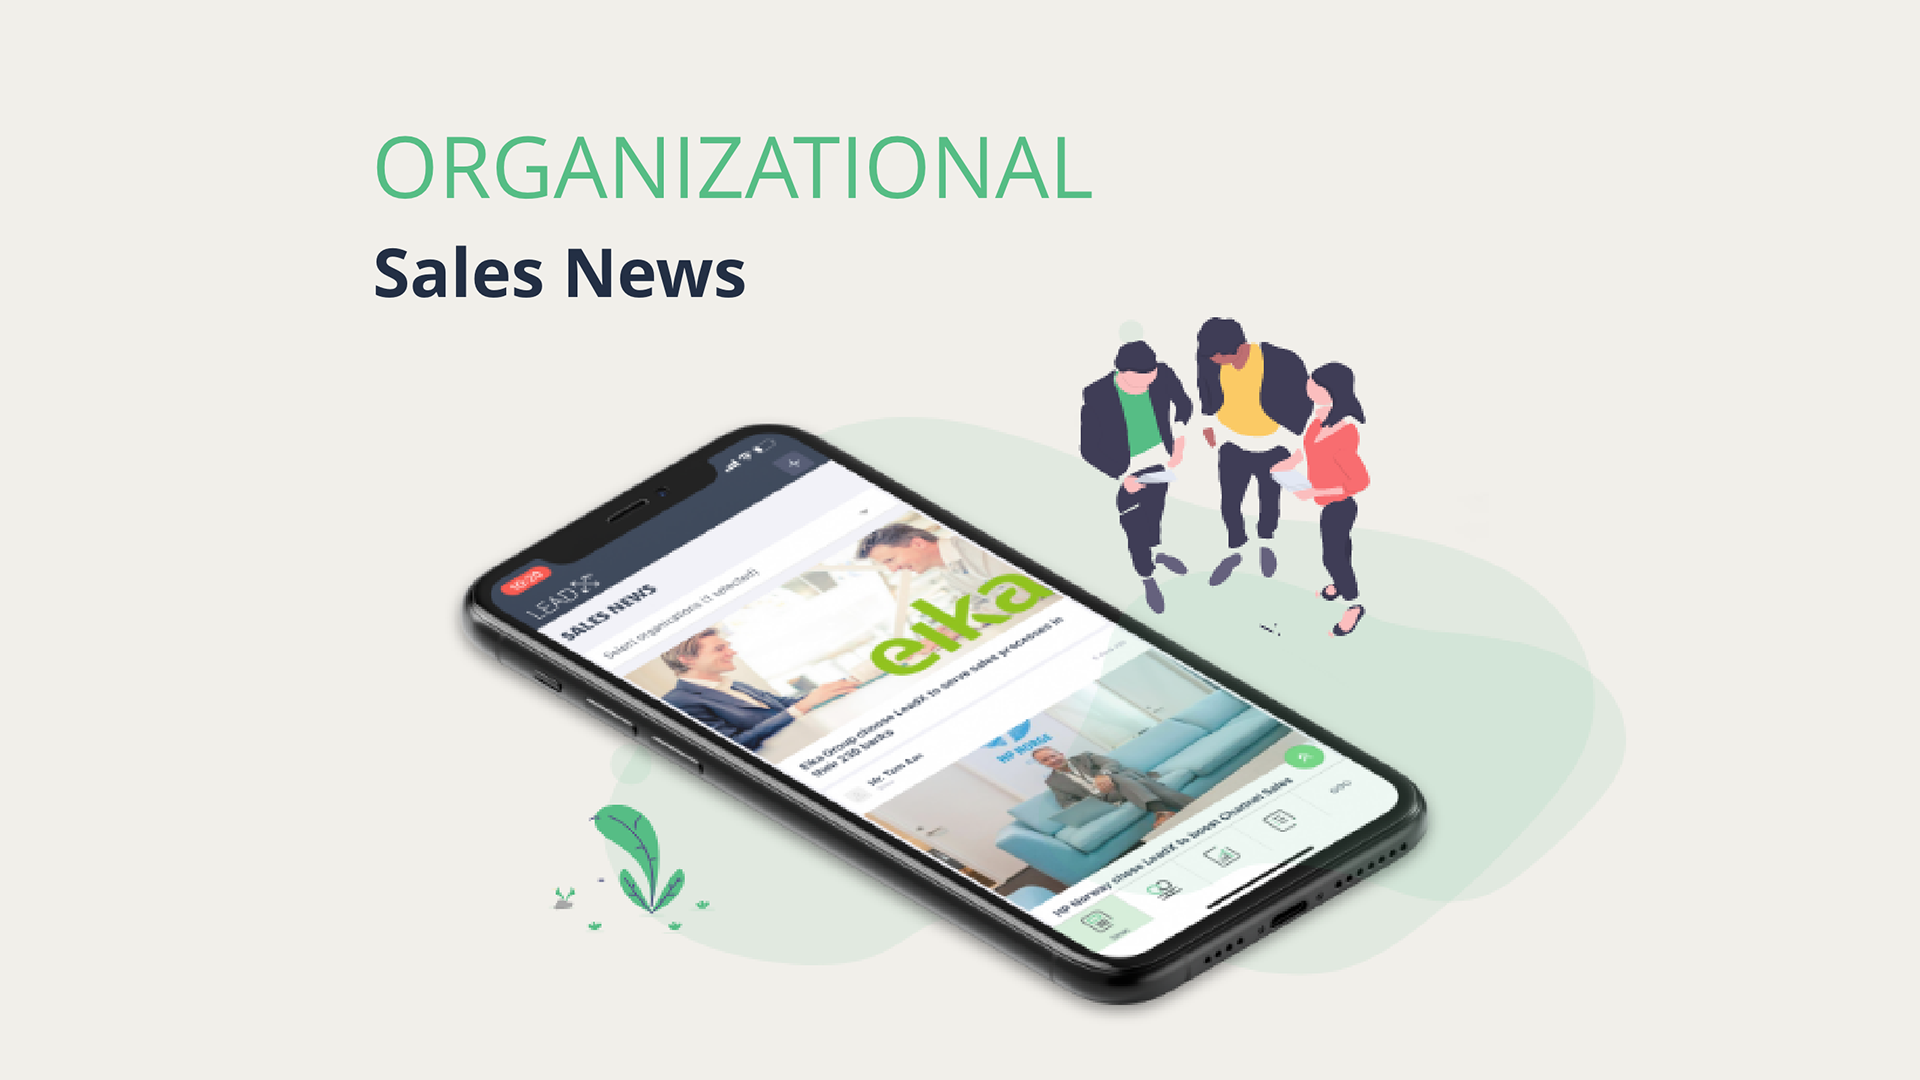 News from the sales organization